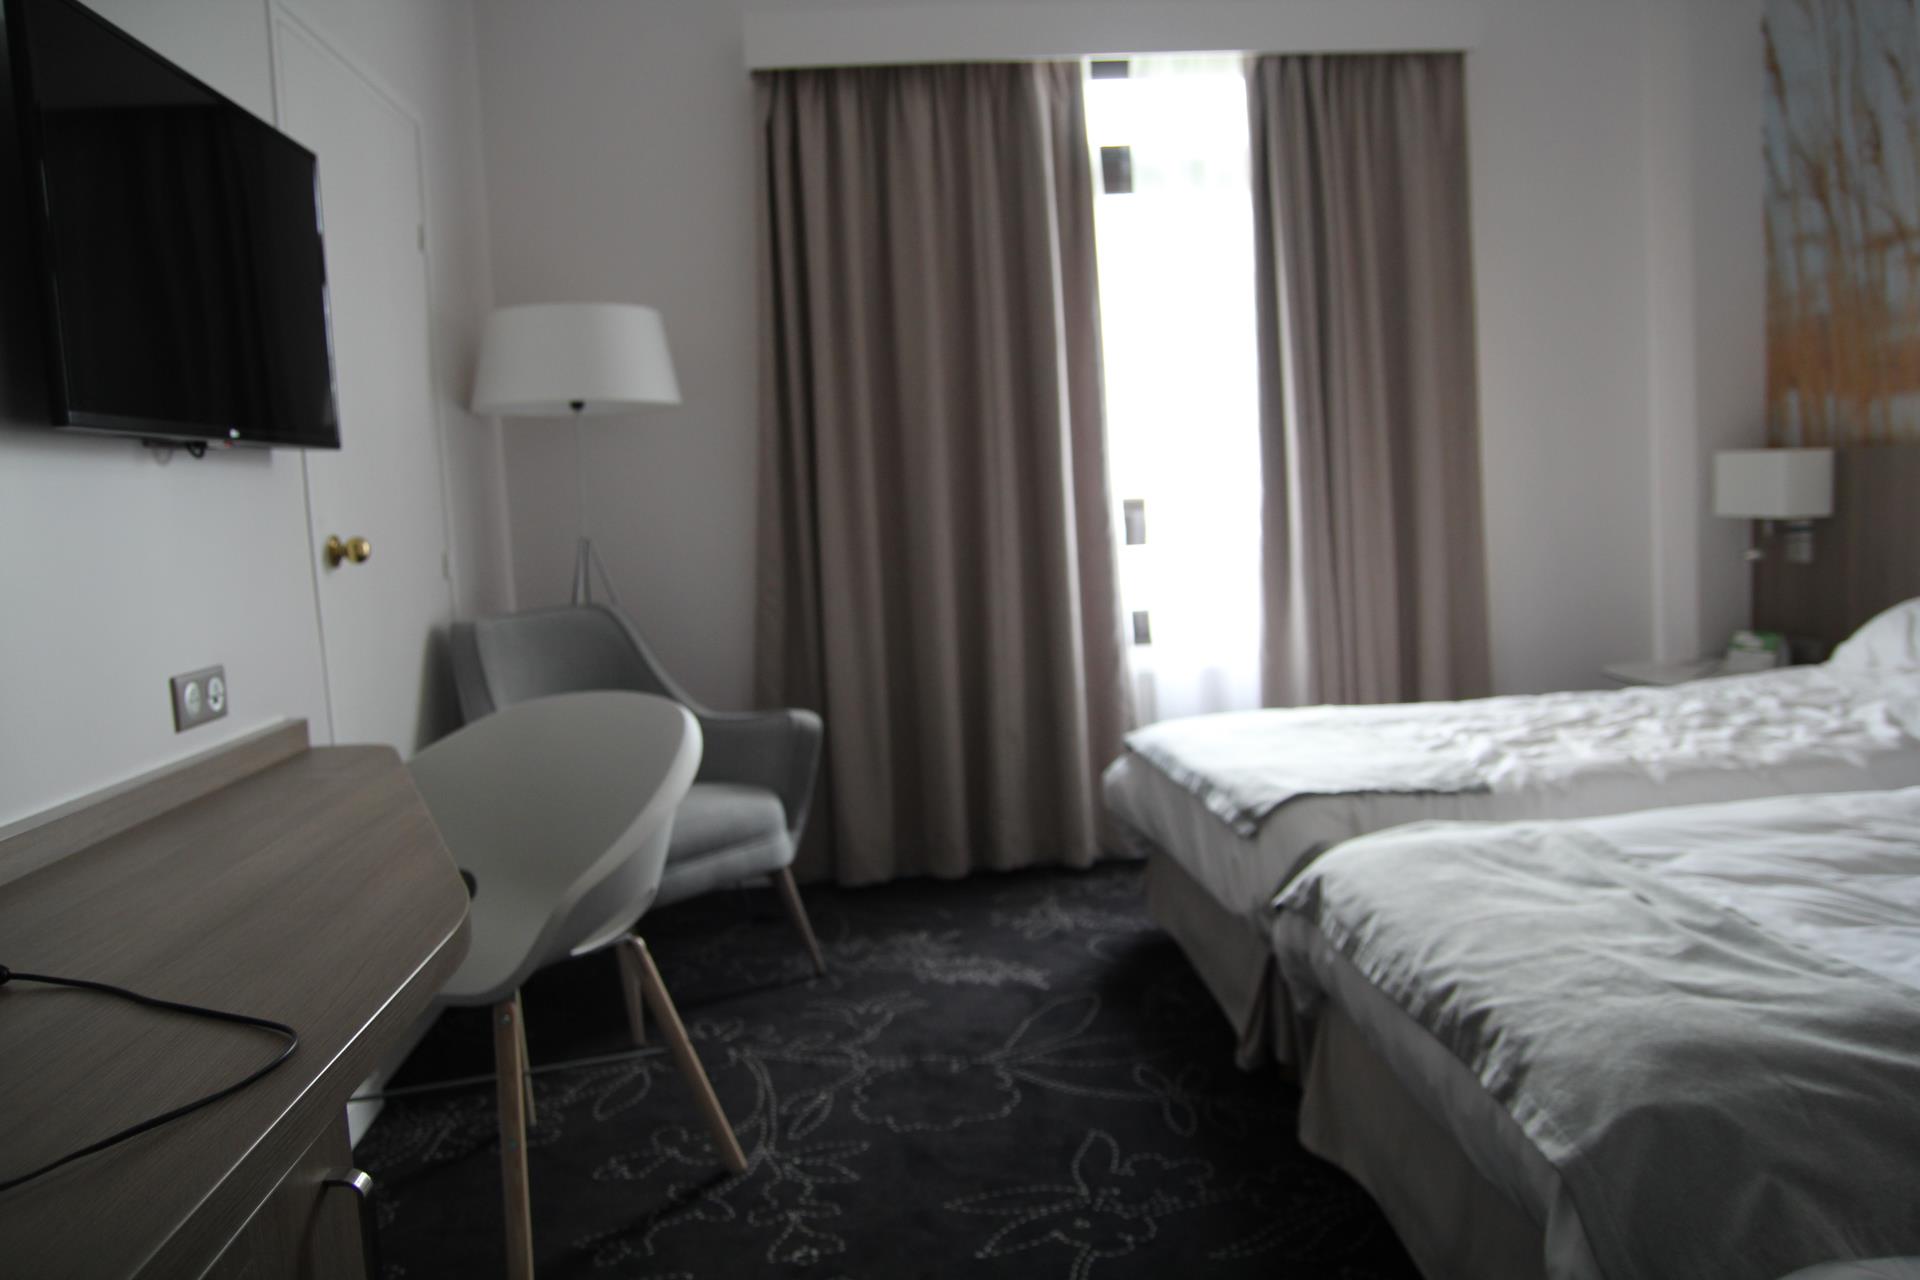 Accessible Hotel very close to Channel Tunnel in France